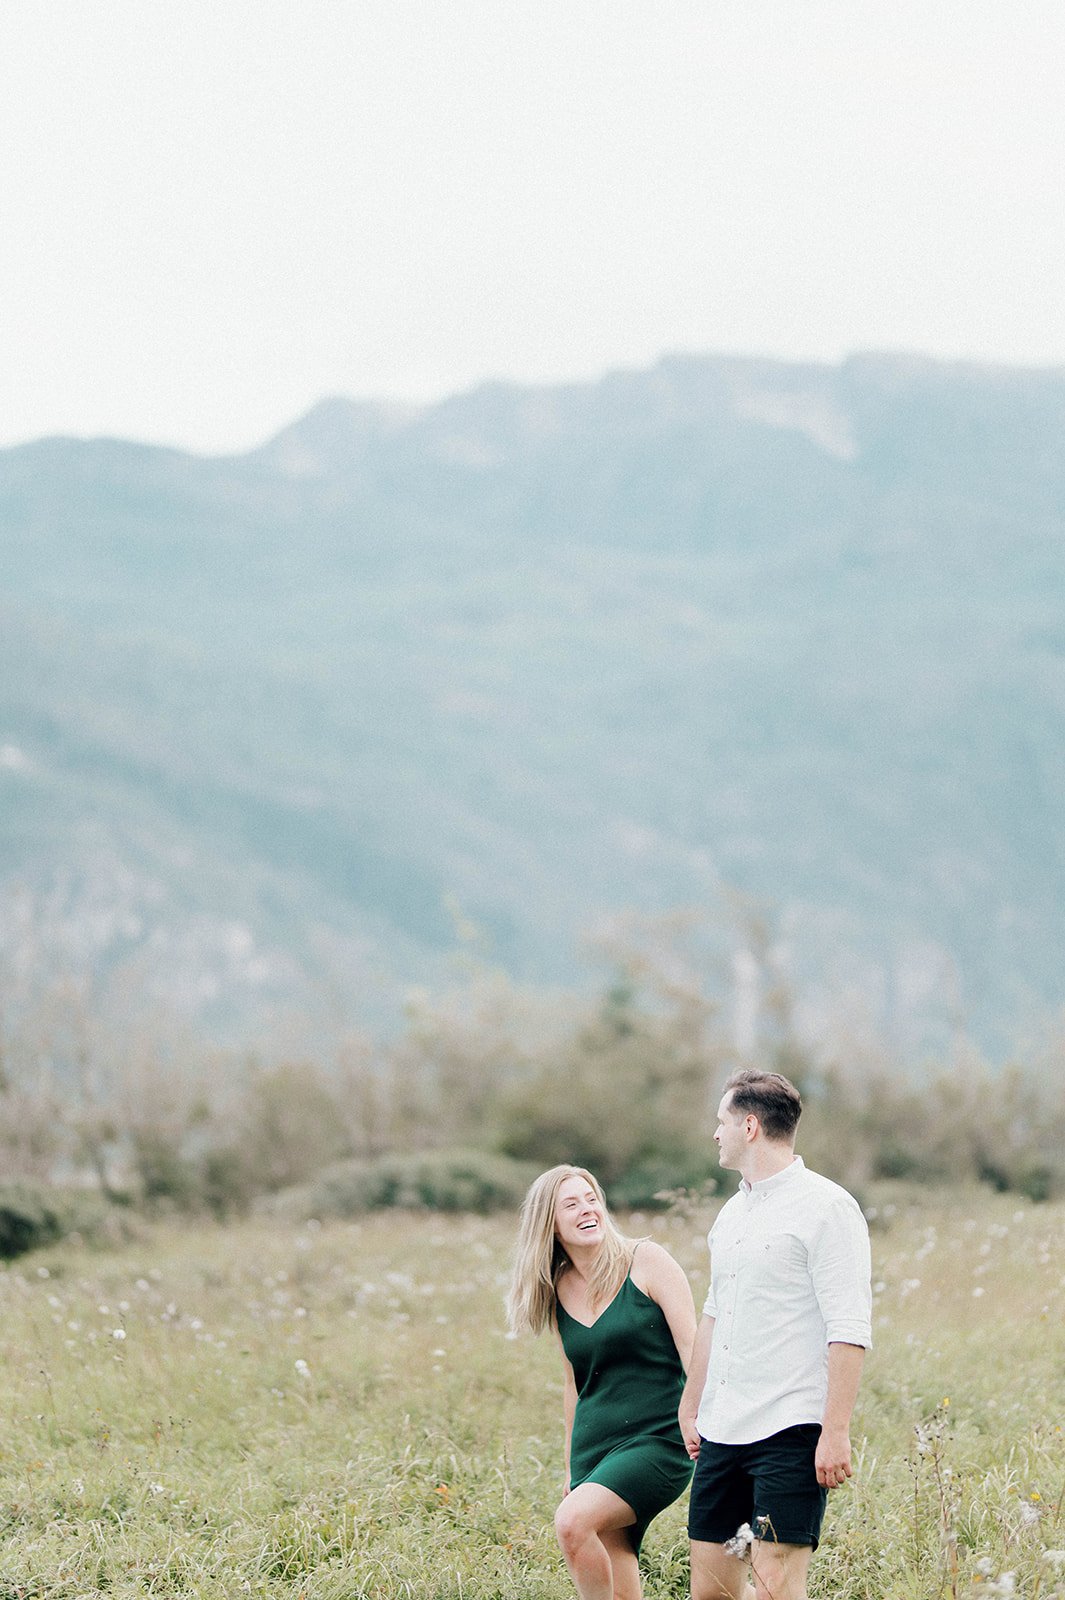 A young and beautiful engaged couple laugh as they stroll through a grassy field in front of a large mountain in Squamish, BC.